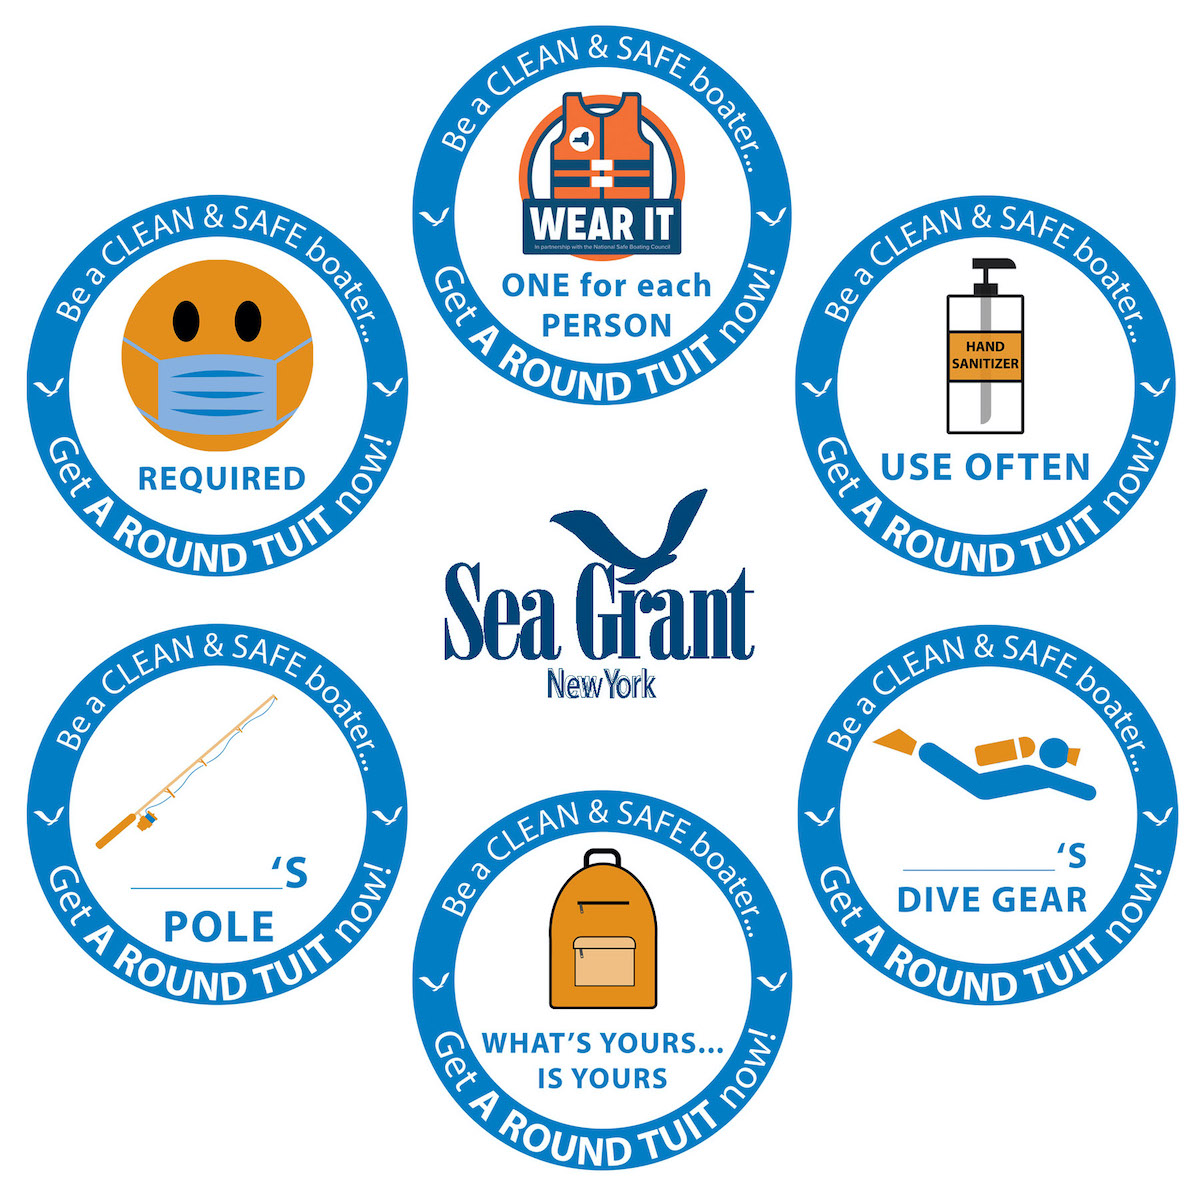 Images courtesy of New York Sea Grant